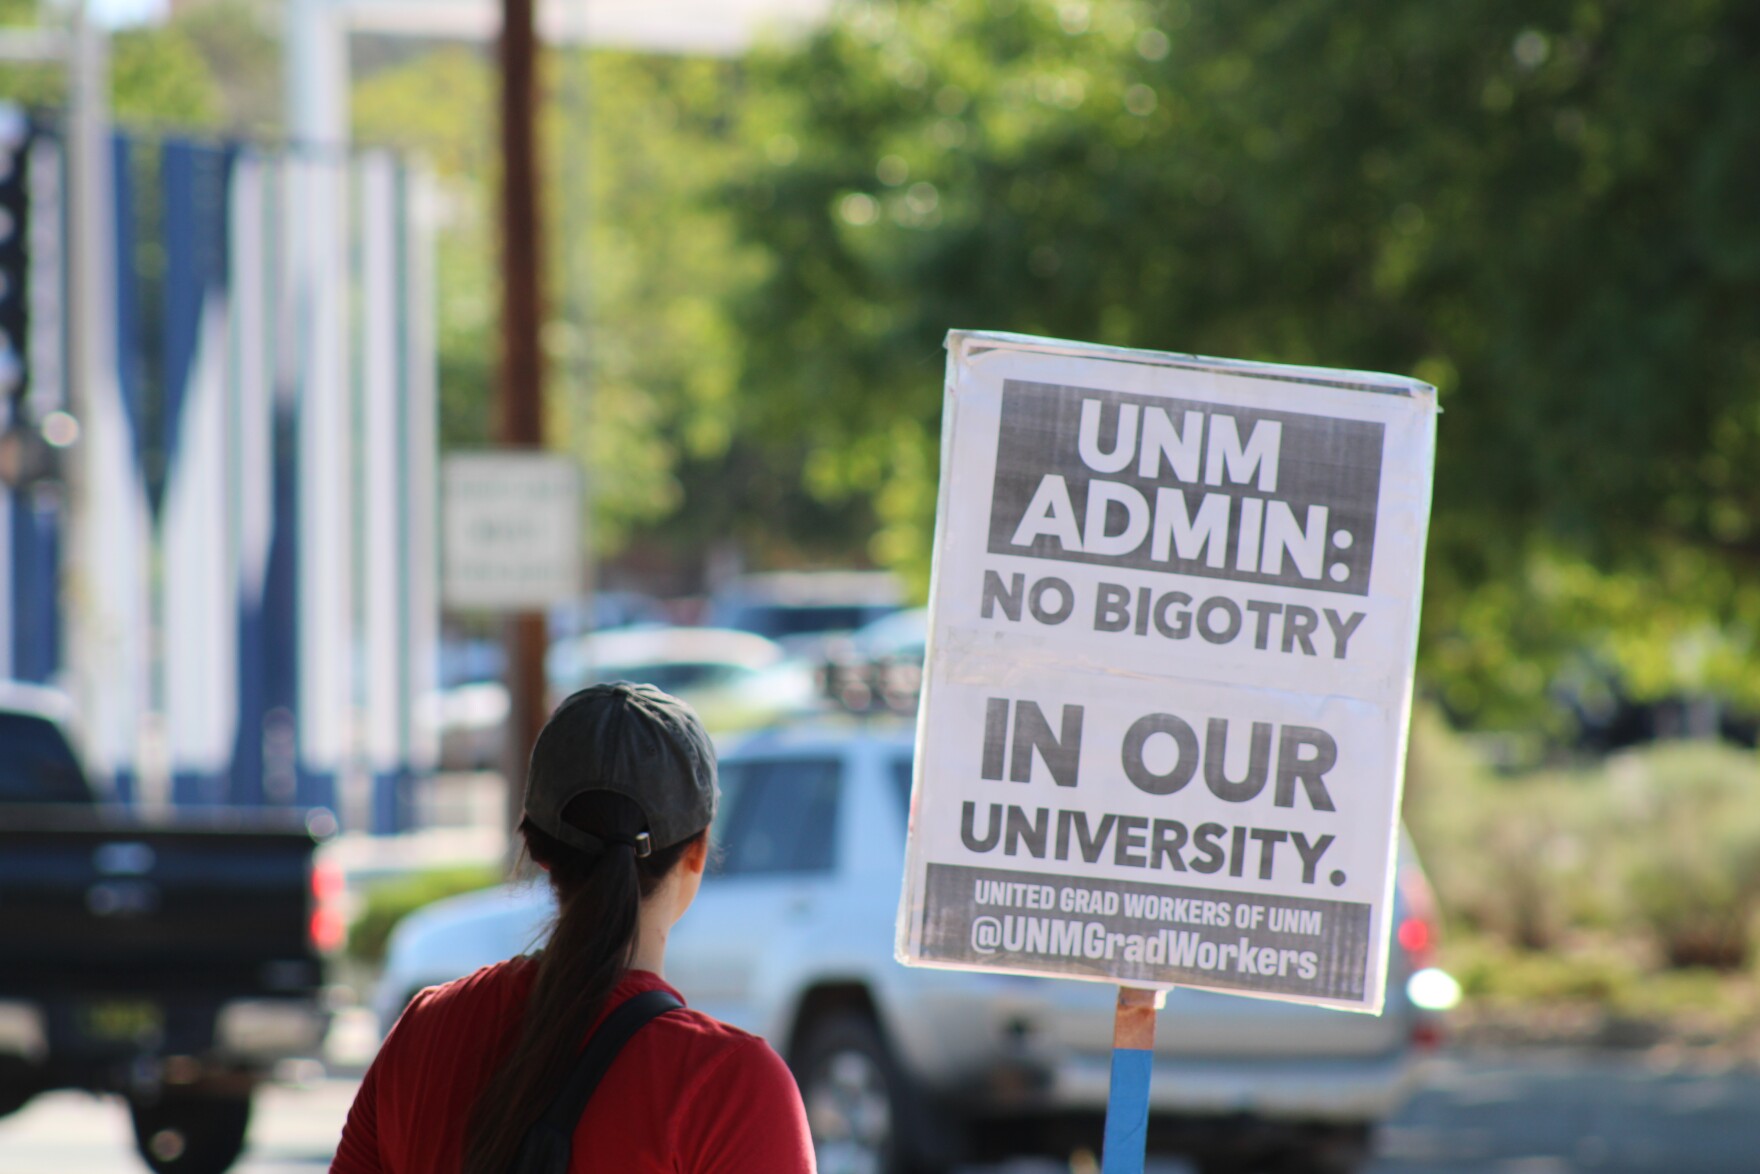 Grad worker holding up picket sign reading UNM Admin: No bigotry in our university.